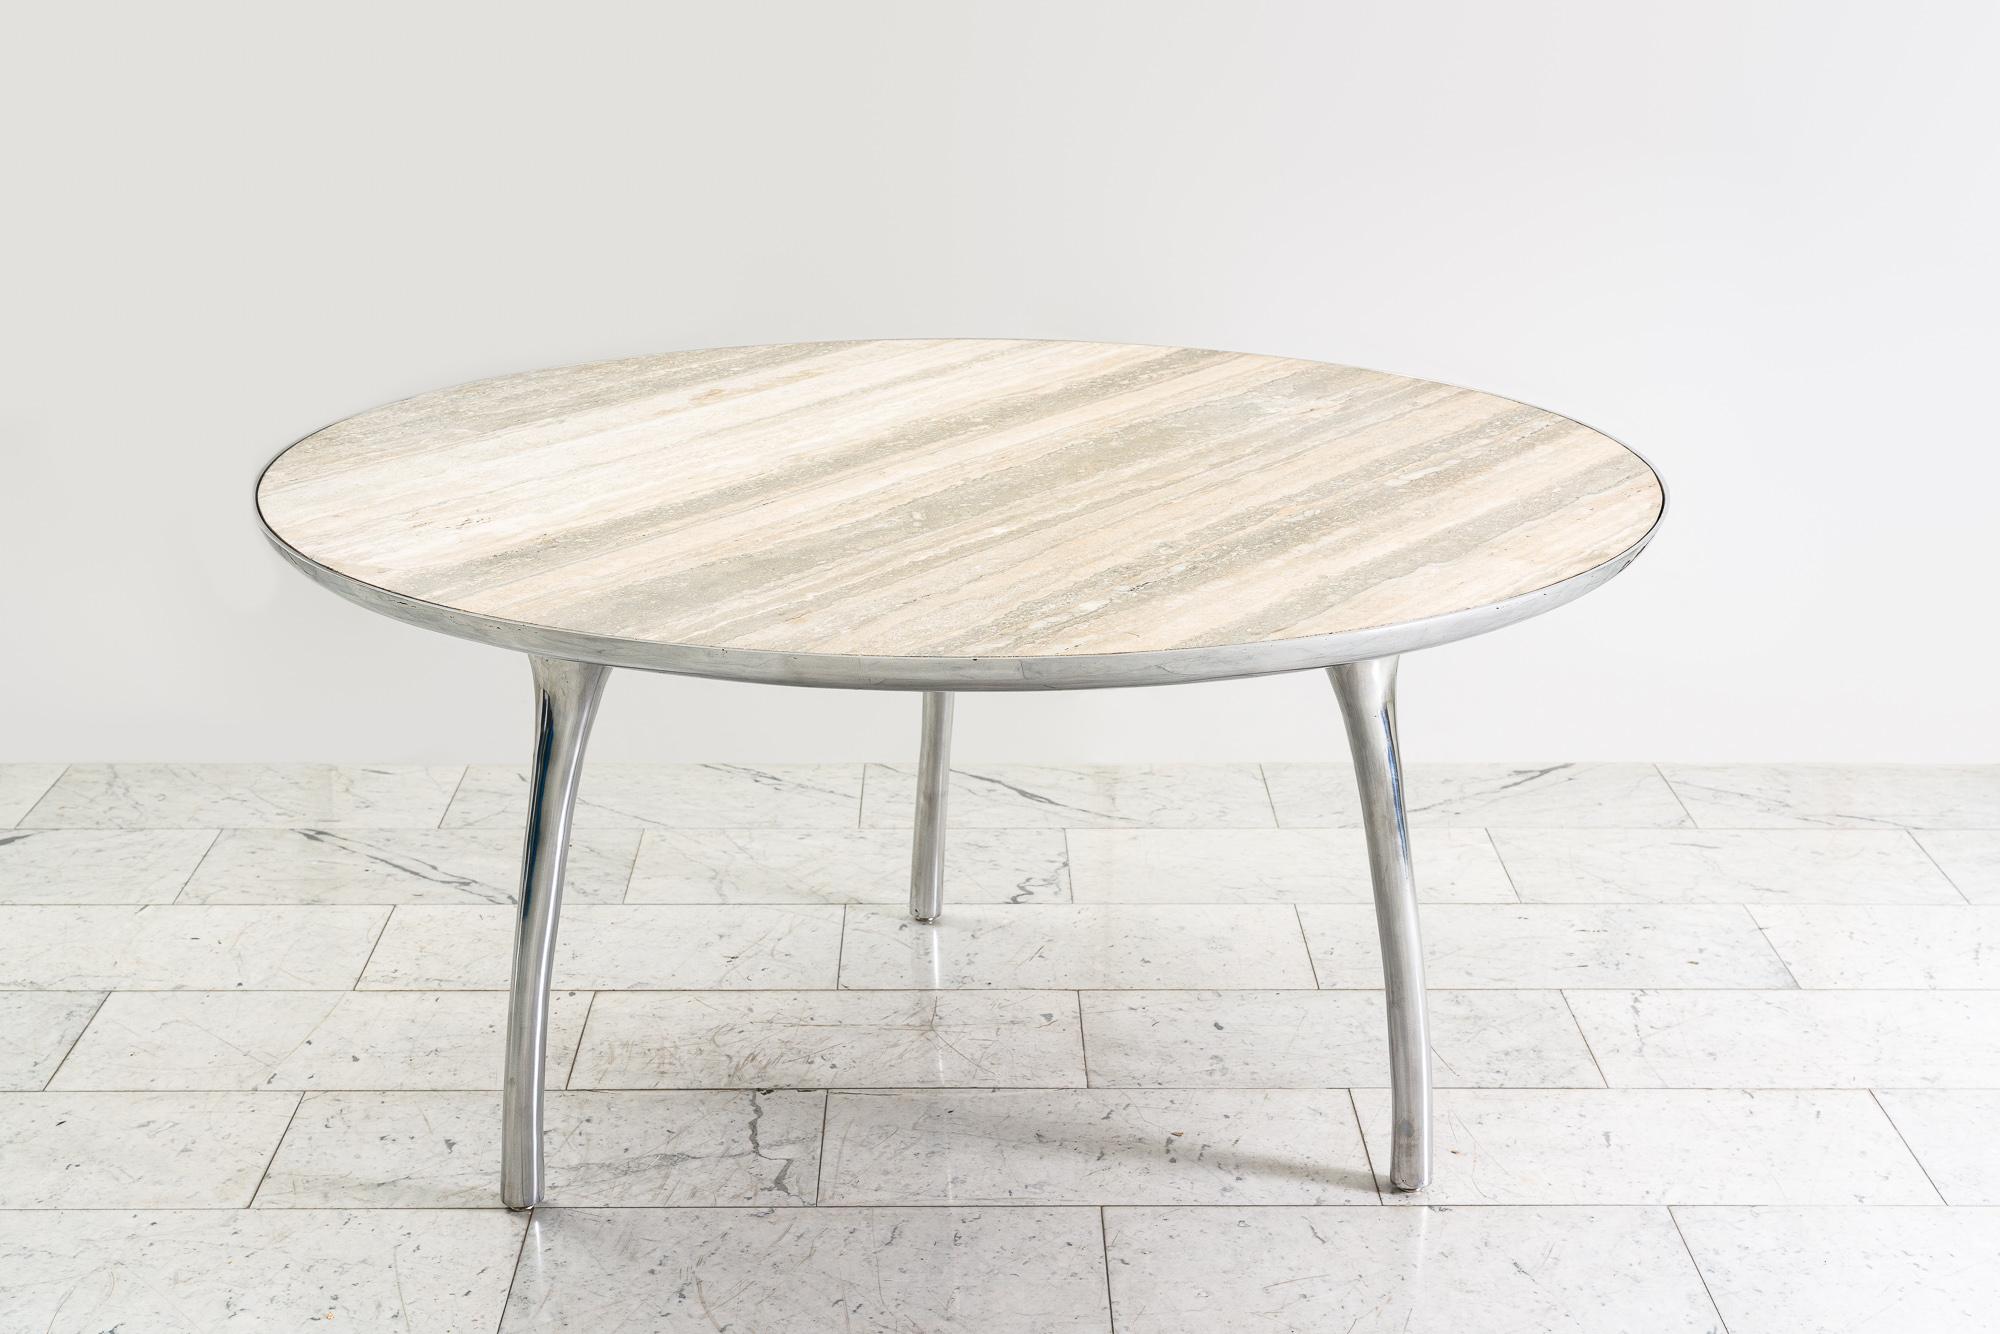 Alex Roskin’s dynamic indoor / outdoor Universal Dining Table, has a gracefully slim profile with three meticulously balanced aluminum legs supporting a travertine top inset into a sleek bezel. The minimalist design and Roskin’s penchant for precise